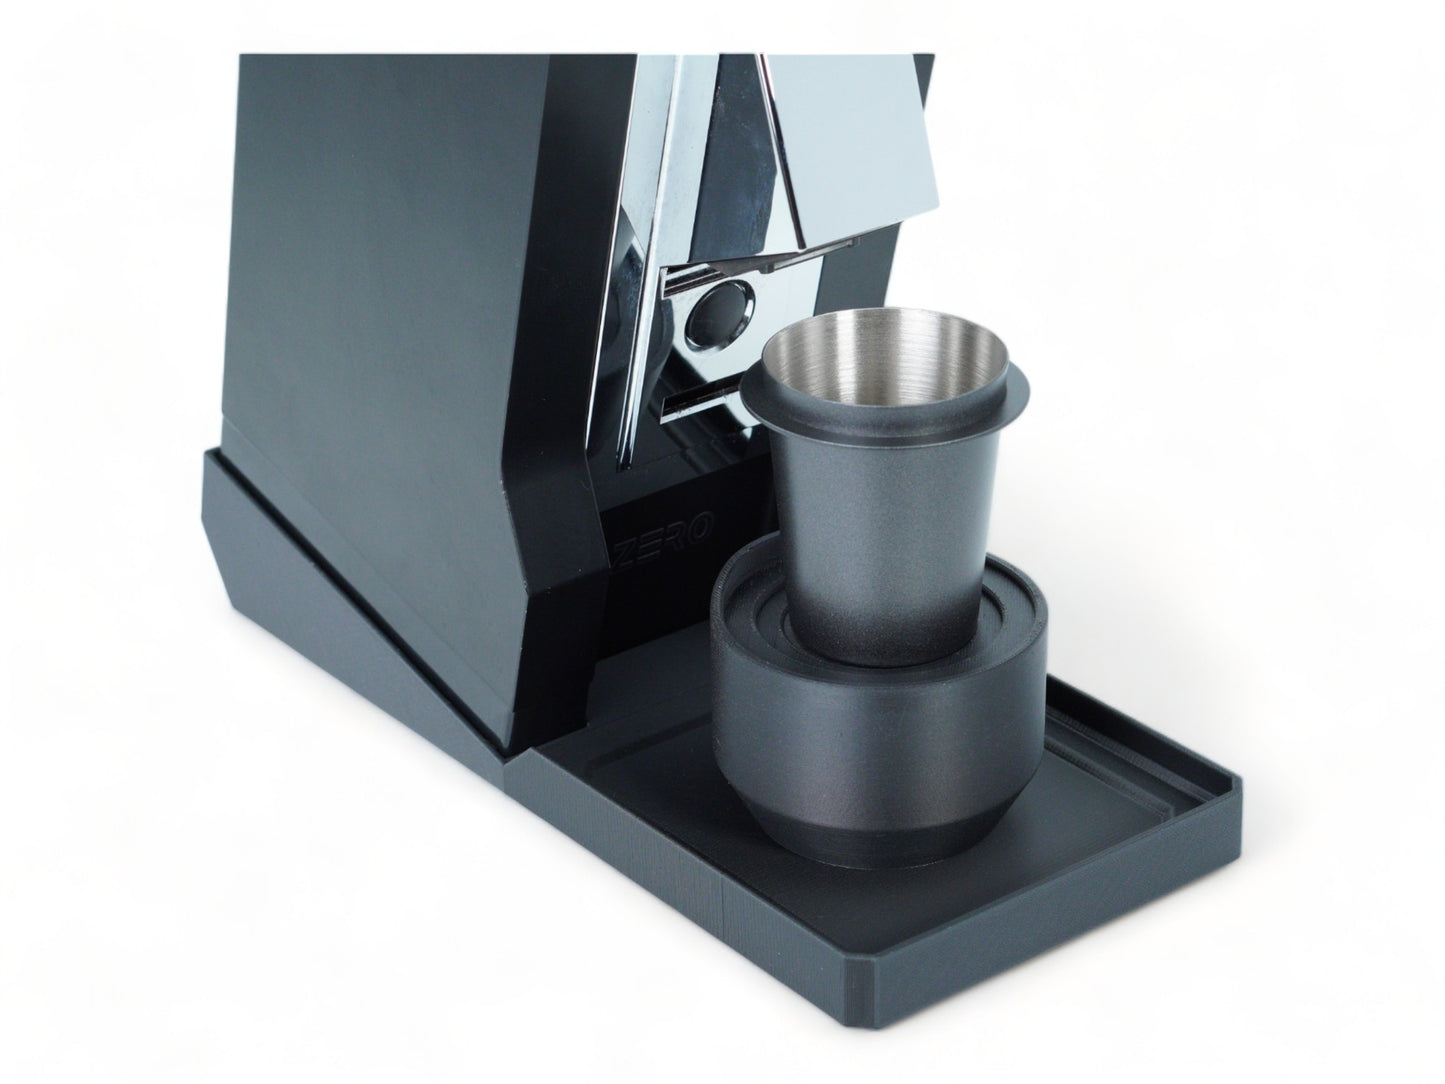 Eureka Mignon Blind Shaker and Cup Stand | Weber Workshop | MHW-3BOMBER | Magnetic Positioning | 58mm Metal Cup